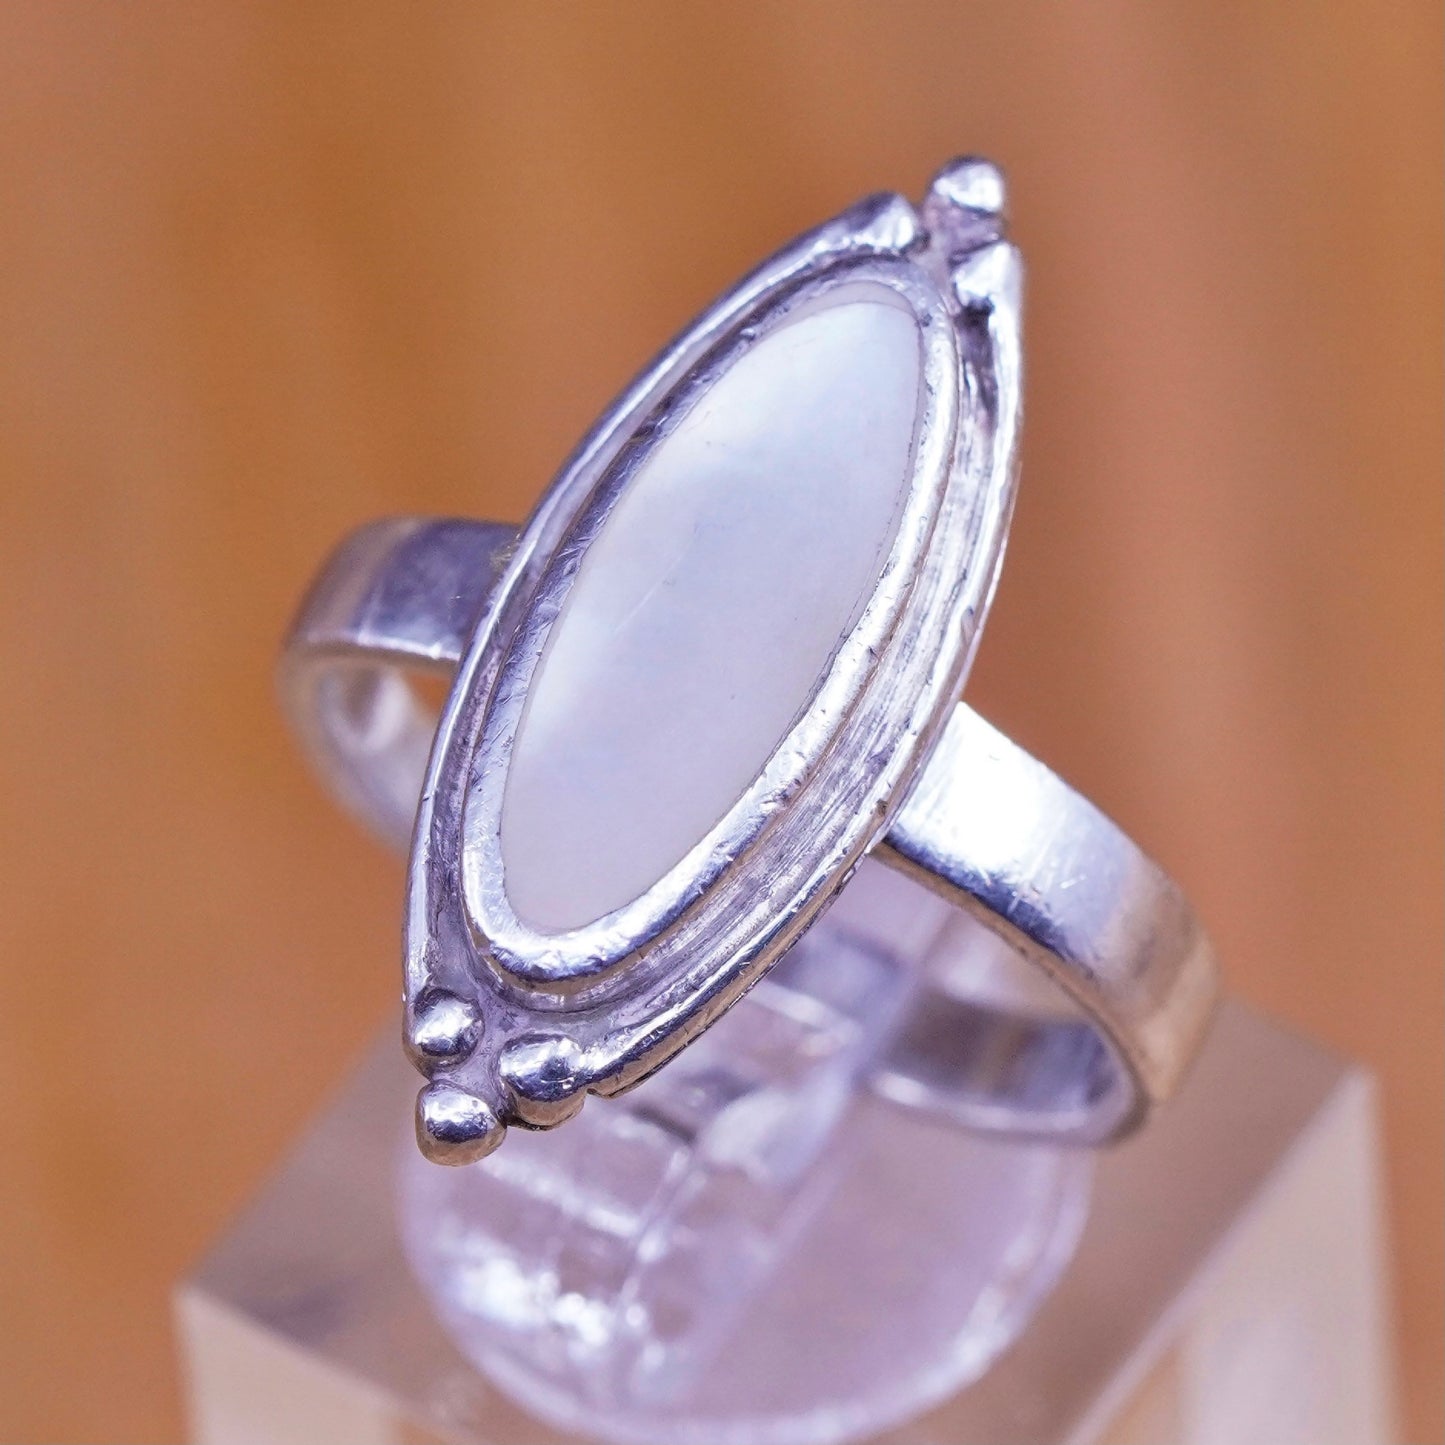 Size 8.25, vintage Sterling 925 silver handmade ring with mother of pearl